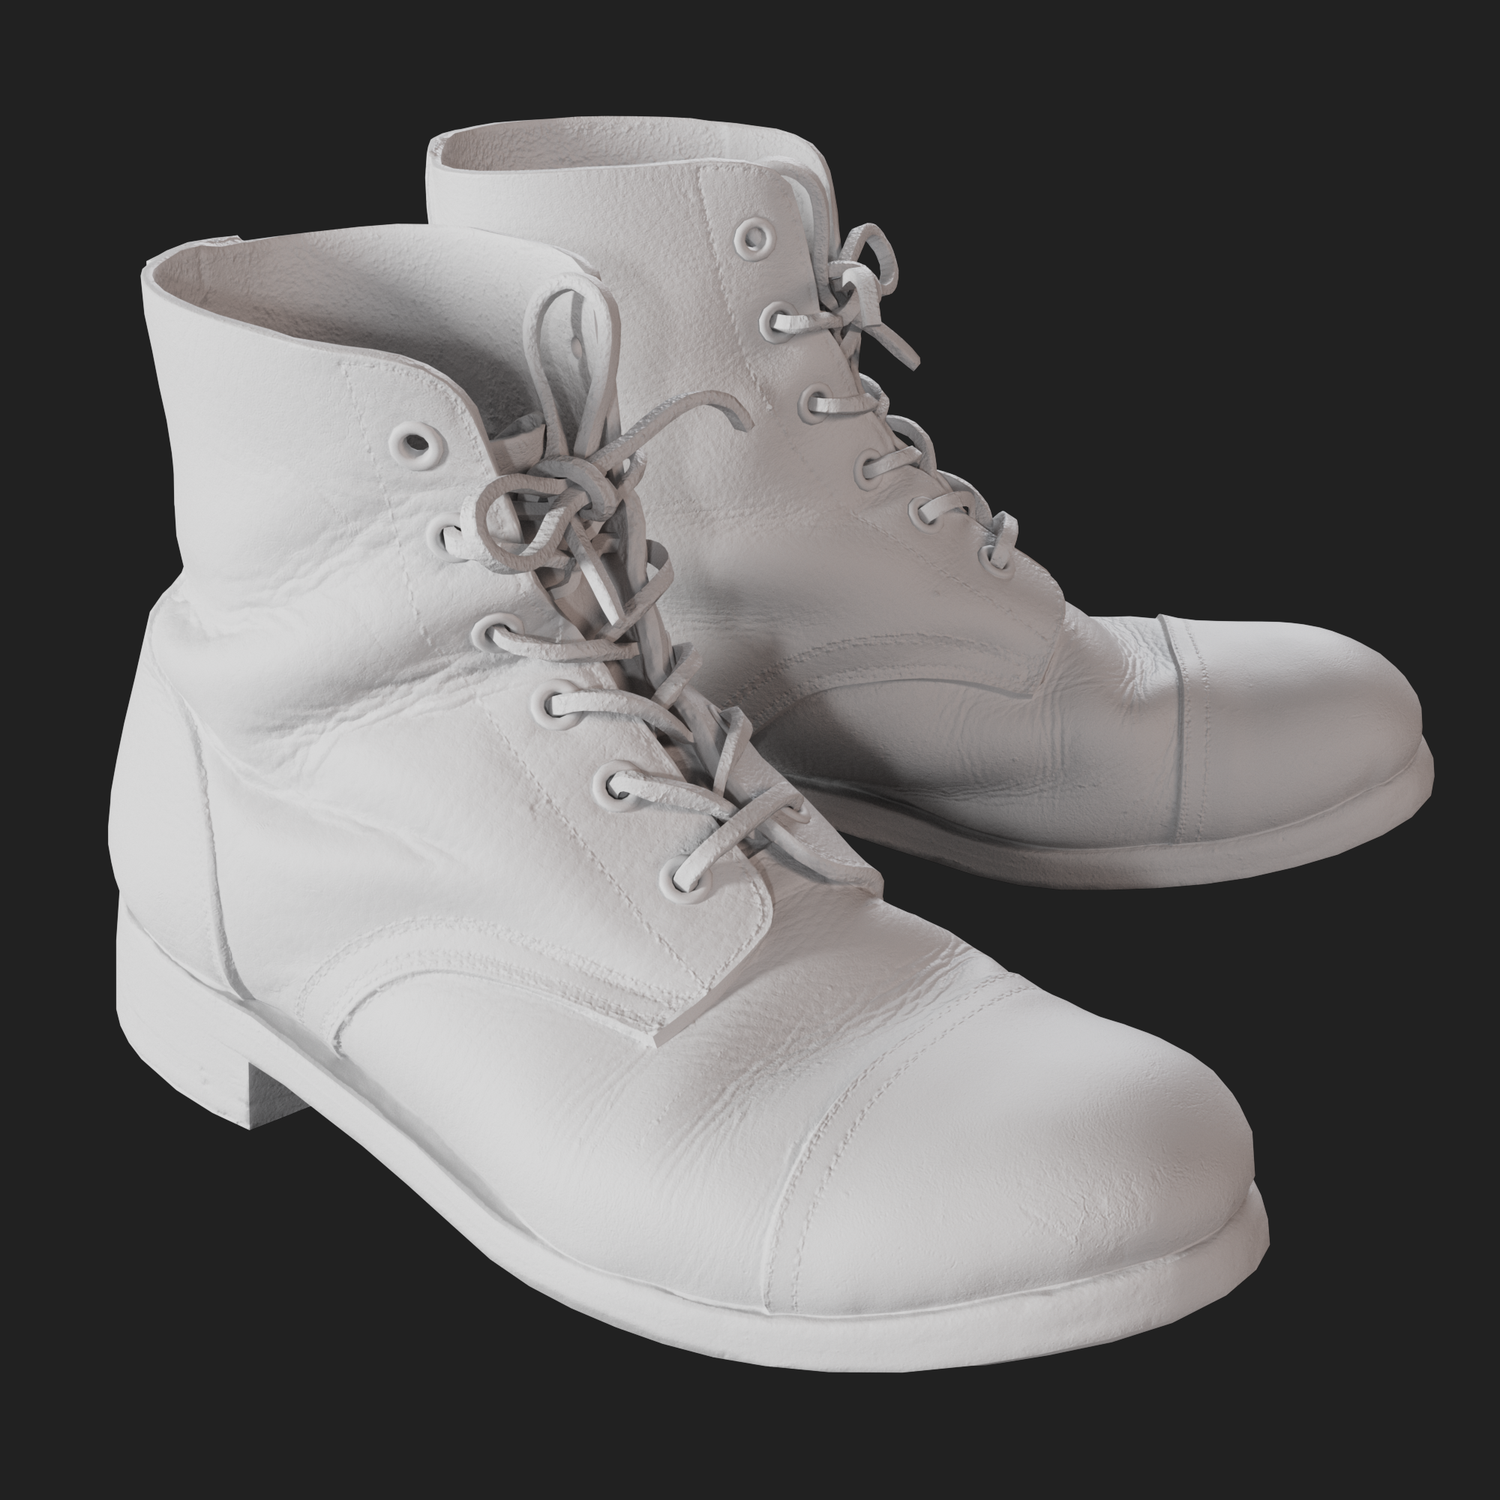 UK Army Boots